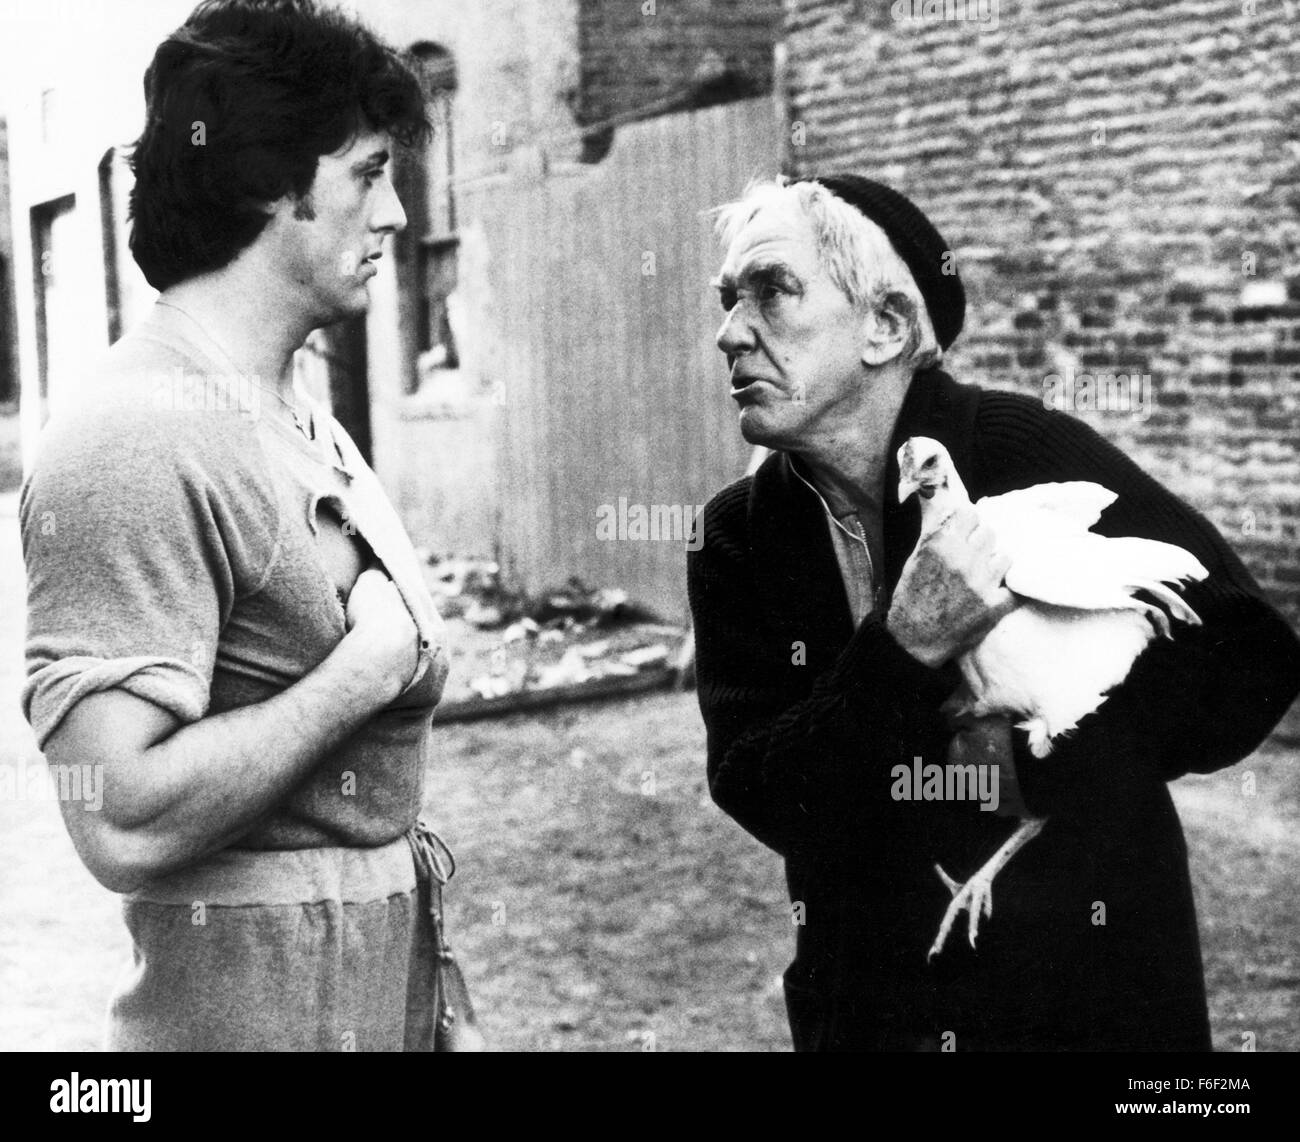 Jun 15, 1979; Philadelphia, PA, USA; SYLVESTER STALLONE (left) as Rocky Balboa and BURGESS MEREDITH as Mickey Goldmill in the action, sport, drama 'Rocky II' directed by Sylvester Stallone. Stock Photo